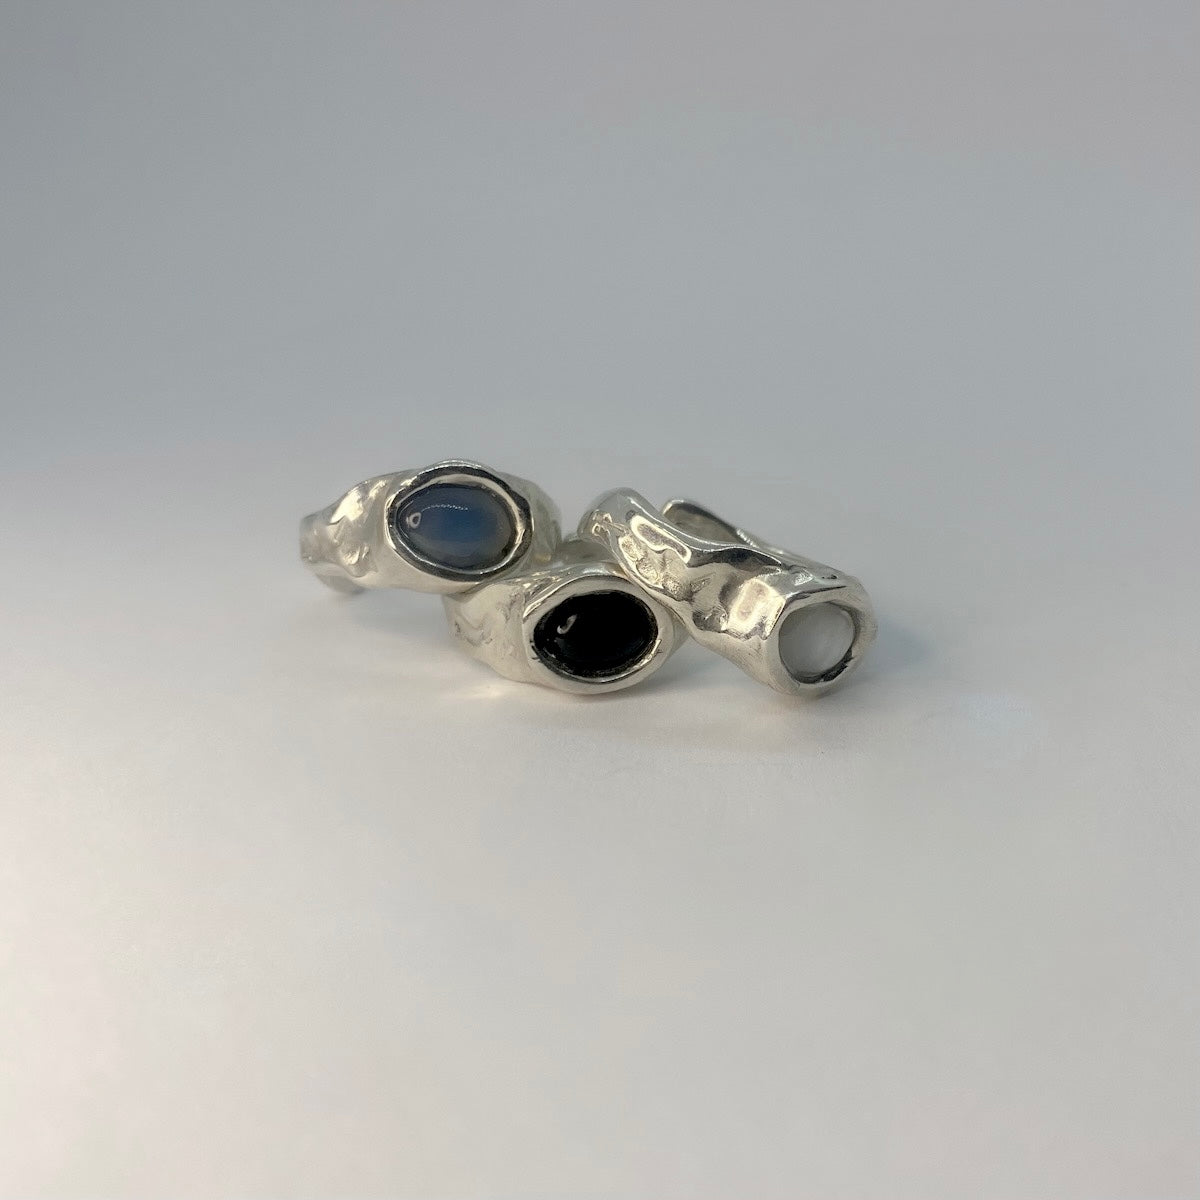 The Velvet ring is a handmade piece made of 925 sterling silver. Its surface is raw, and it features a semi-precious stone. It has a glossy finish.